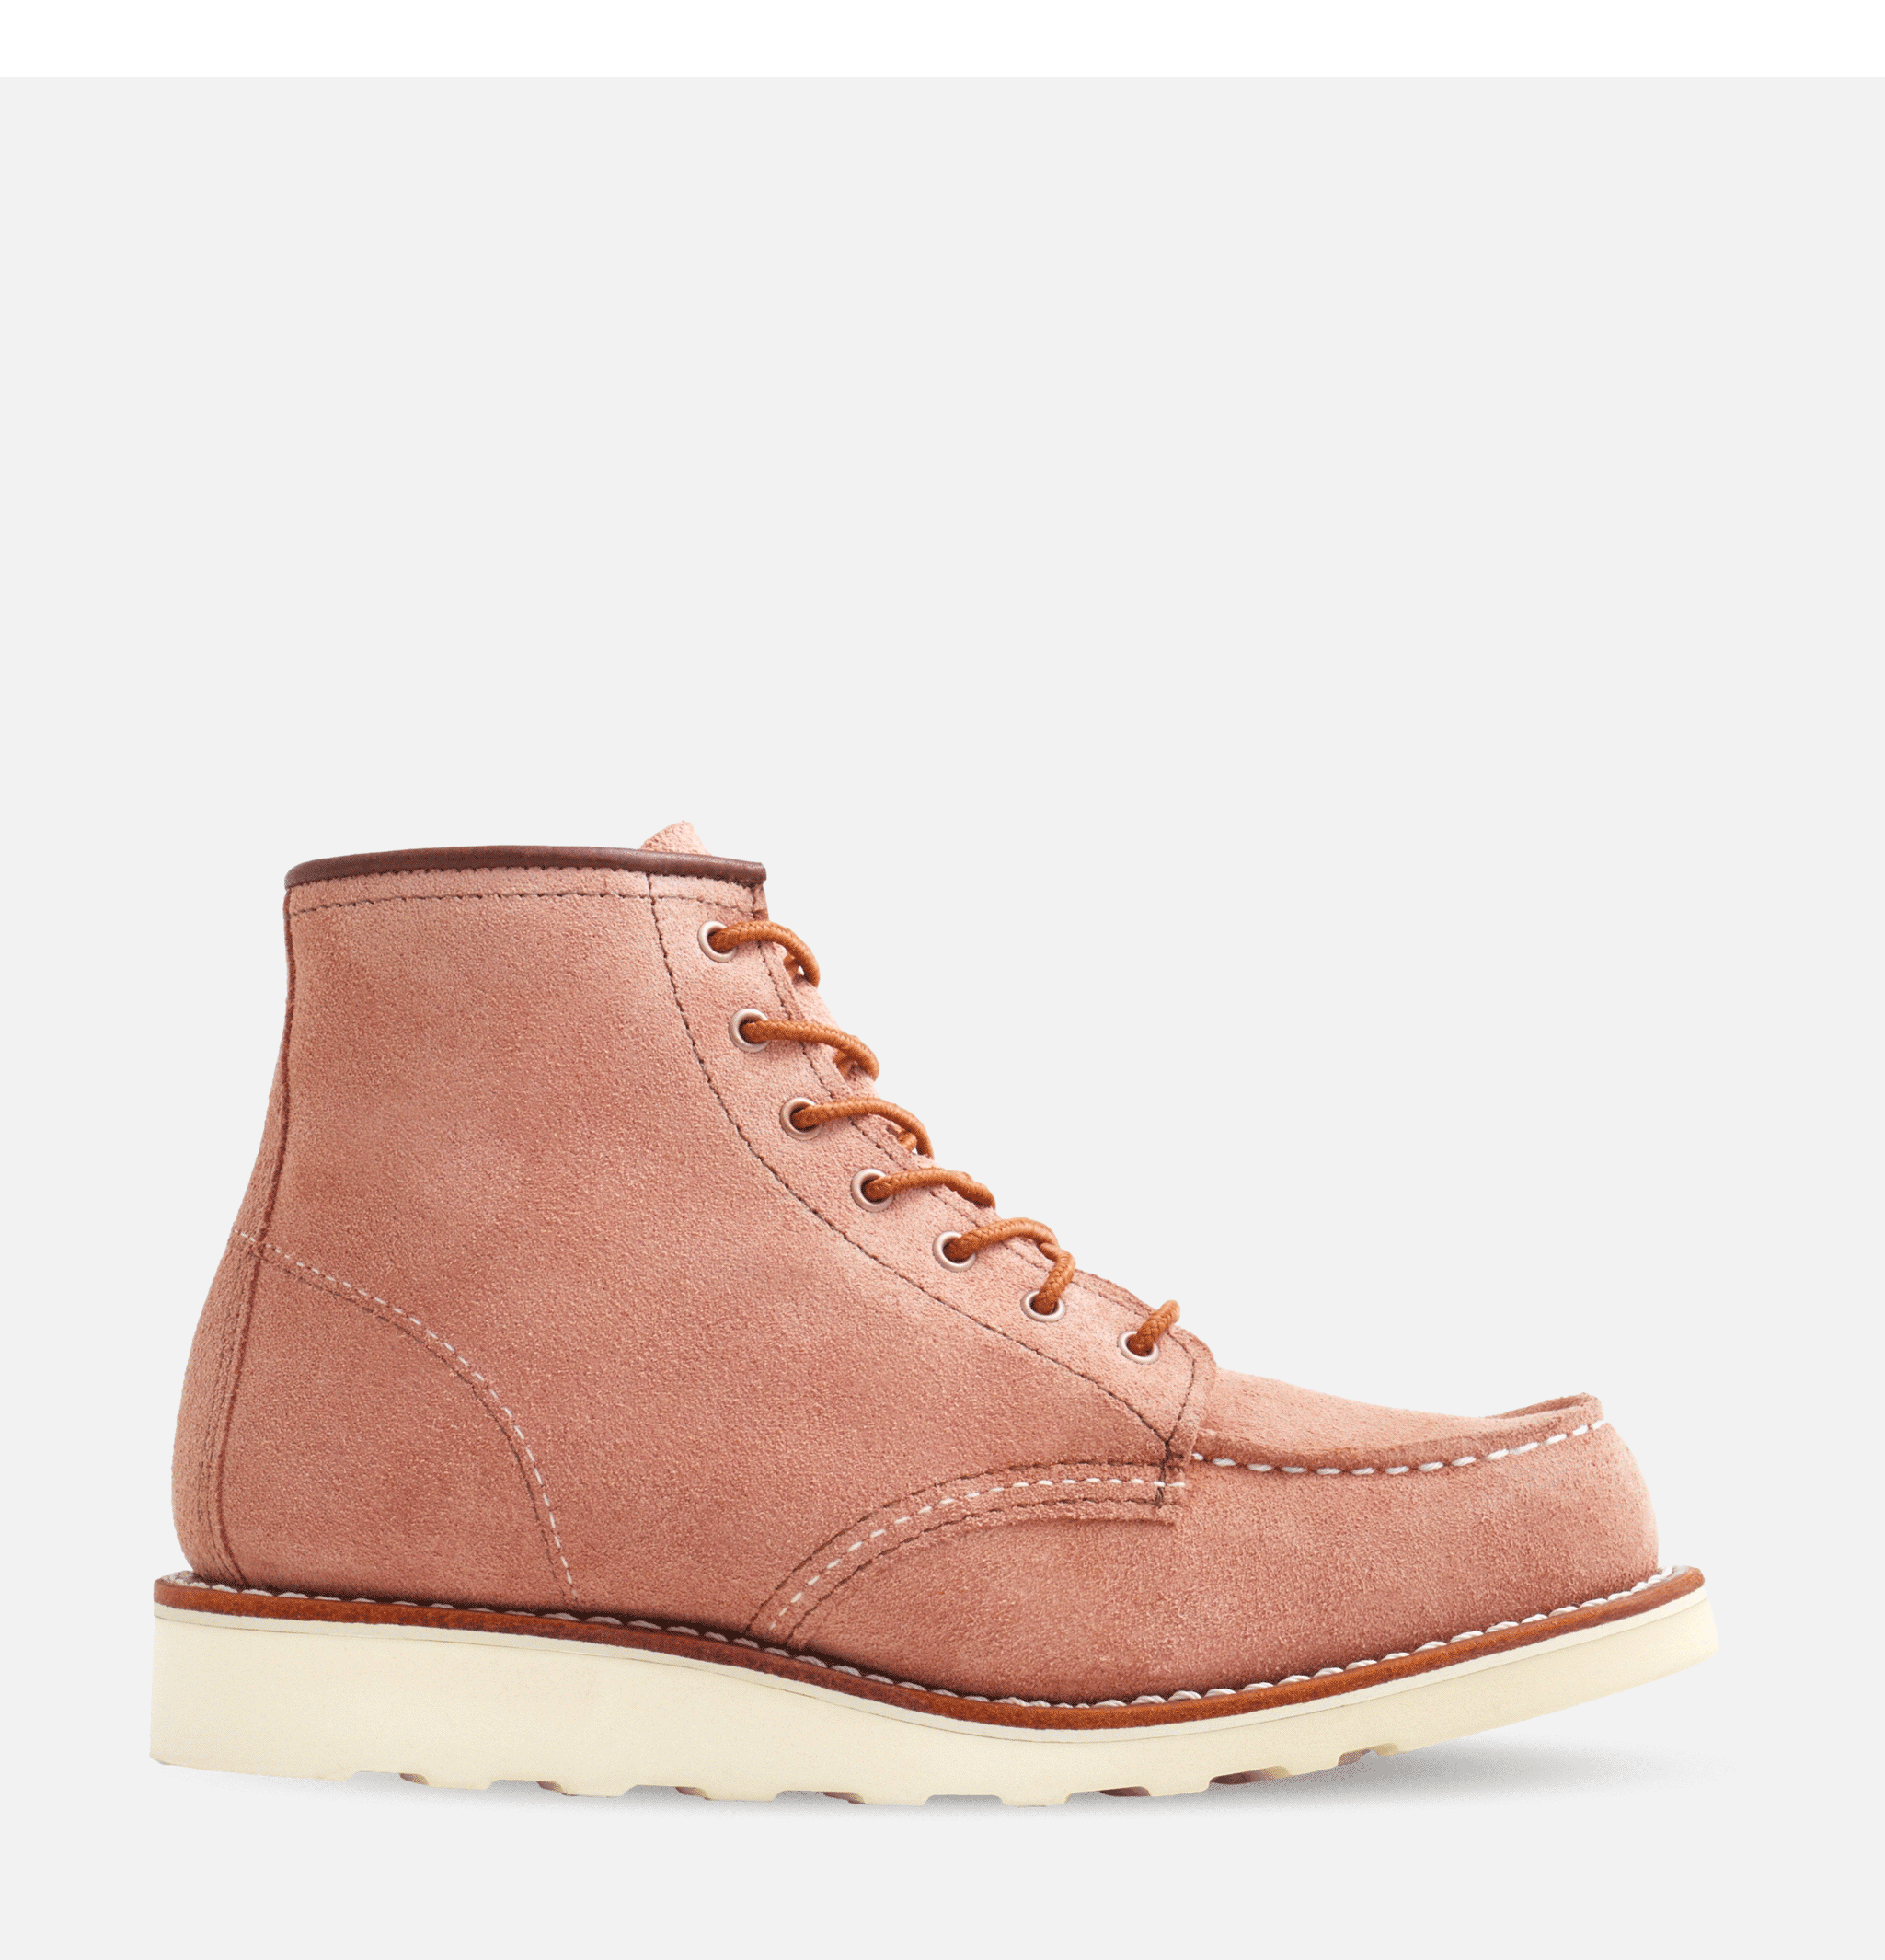 Red Wing Shoes Women 3319 Moc Toe